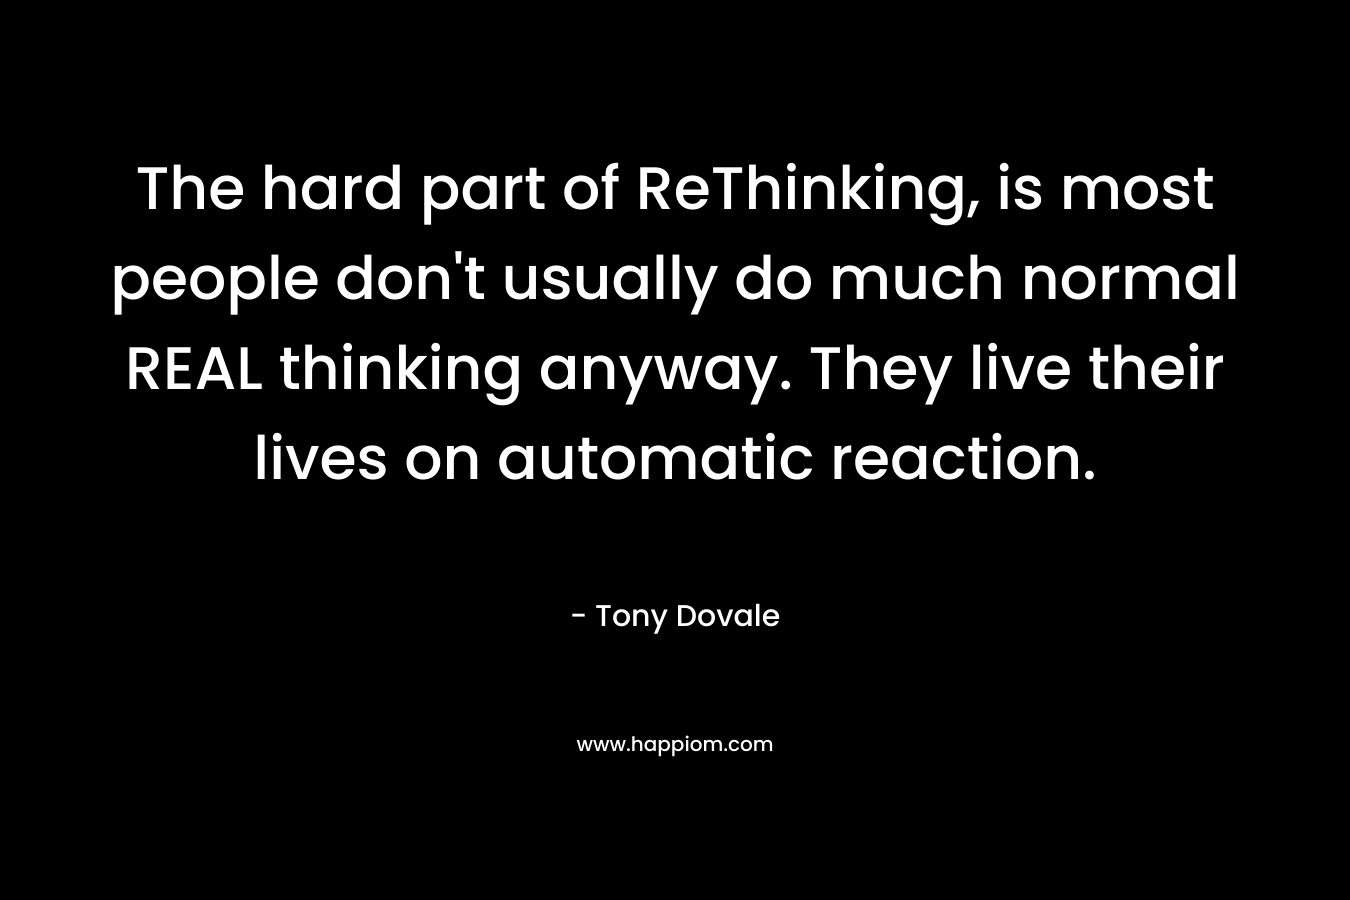 The hard part of ReThinking, is most people don’t usually do much normal REAL thinking anyway. They live their lives on automatic reaction. – Tony Dovale